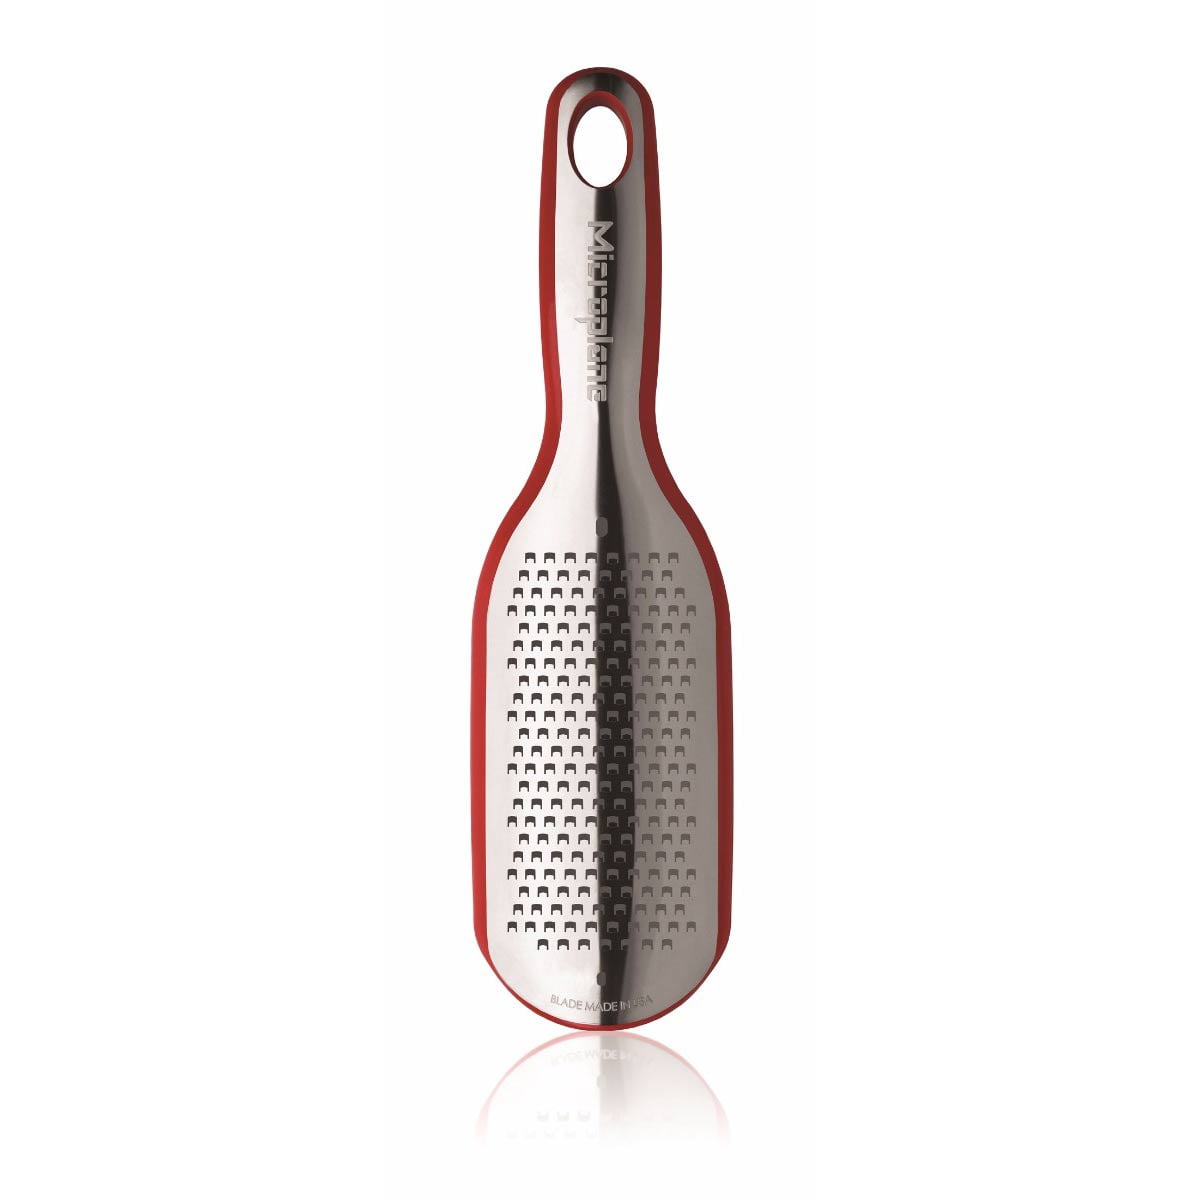 Microplane Elite Series Zester Grater with Measuring Cup Blade Cover - Red